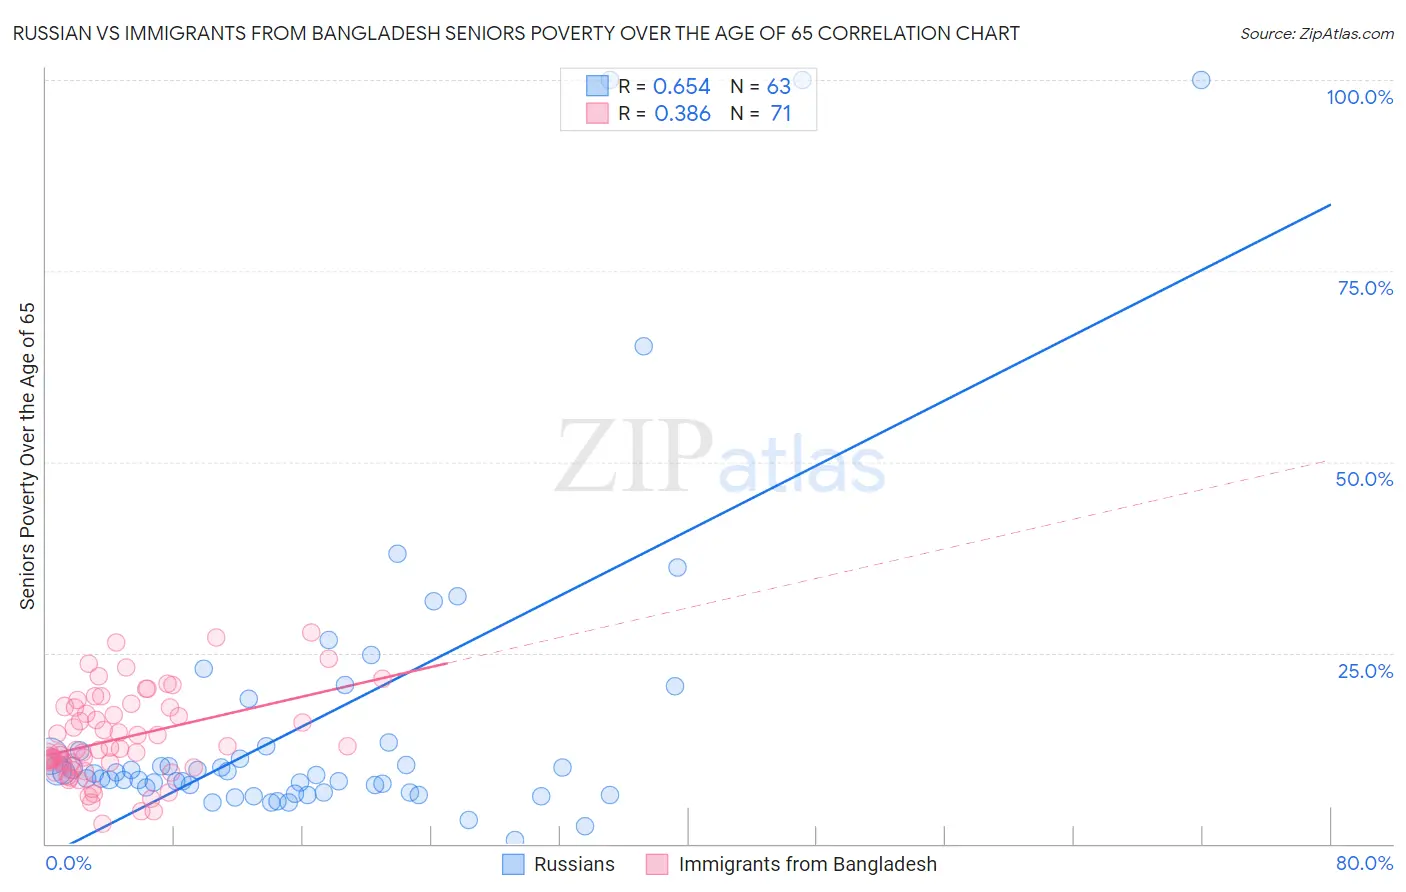 Russian vs Immigrants from Bangladesh Seniors Poverty Over the Age of 65